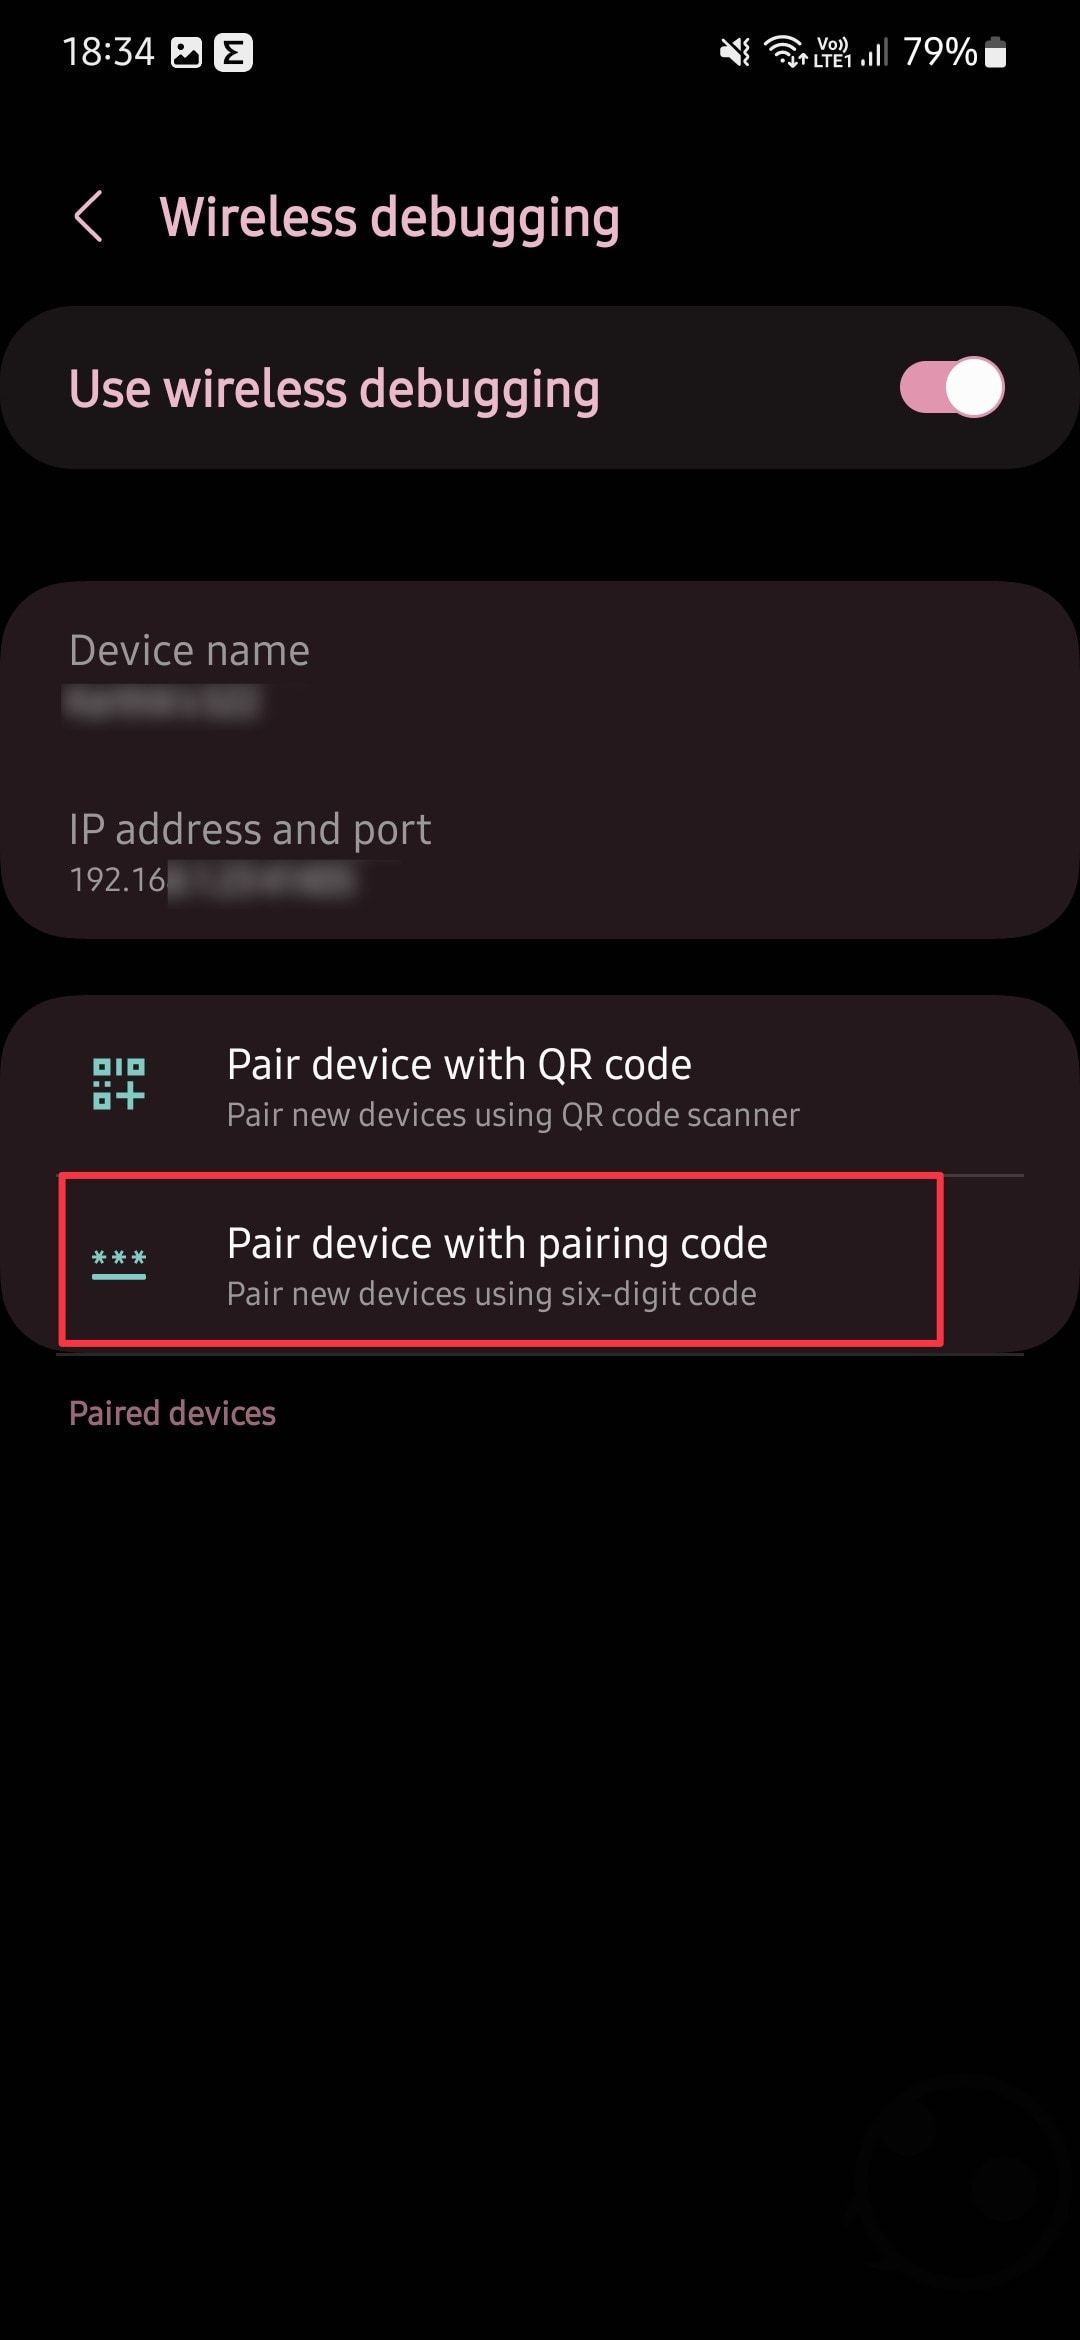 pair device with pairing code